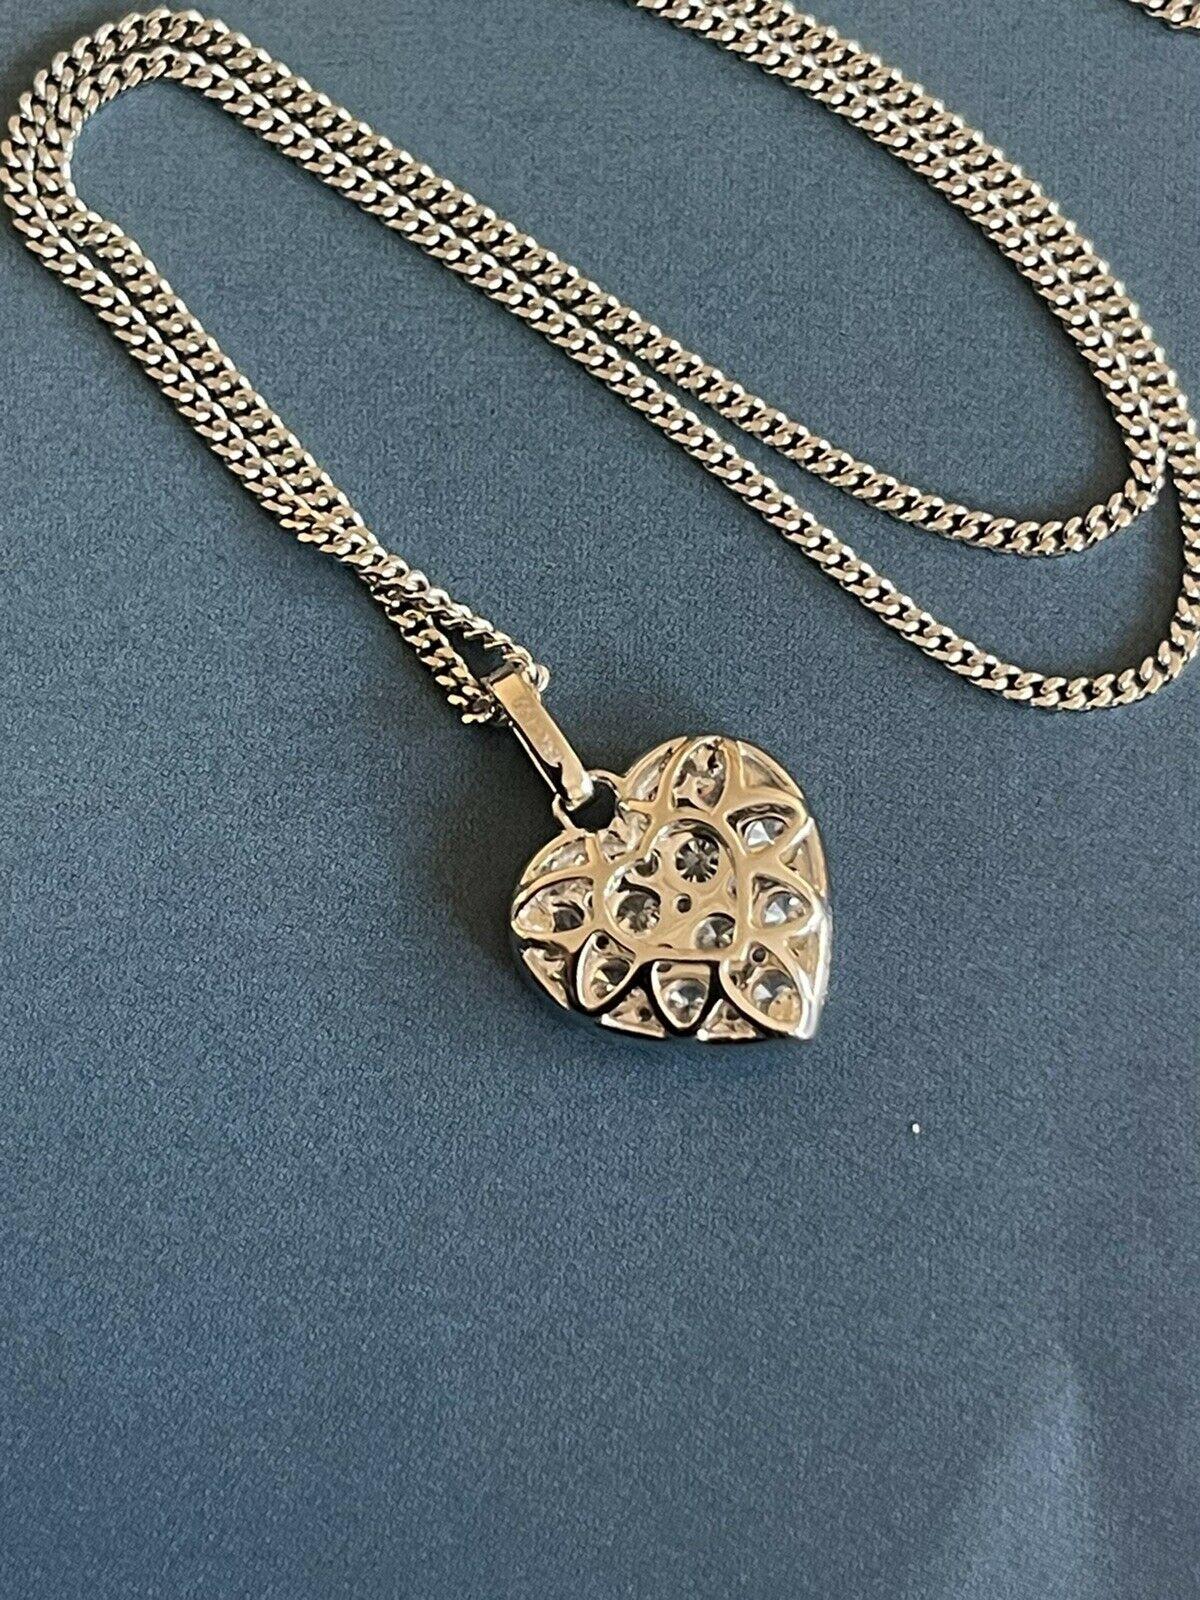 Classic meets high fine jewellery

Beautiful sparkling diamonds 1ct set in heart pendant

New with tag, straight from the heart of London Hatton garden

retail price £2550 - insurance valuation will be sent along

G/H

VS

18 inch chain

Hallmarked